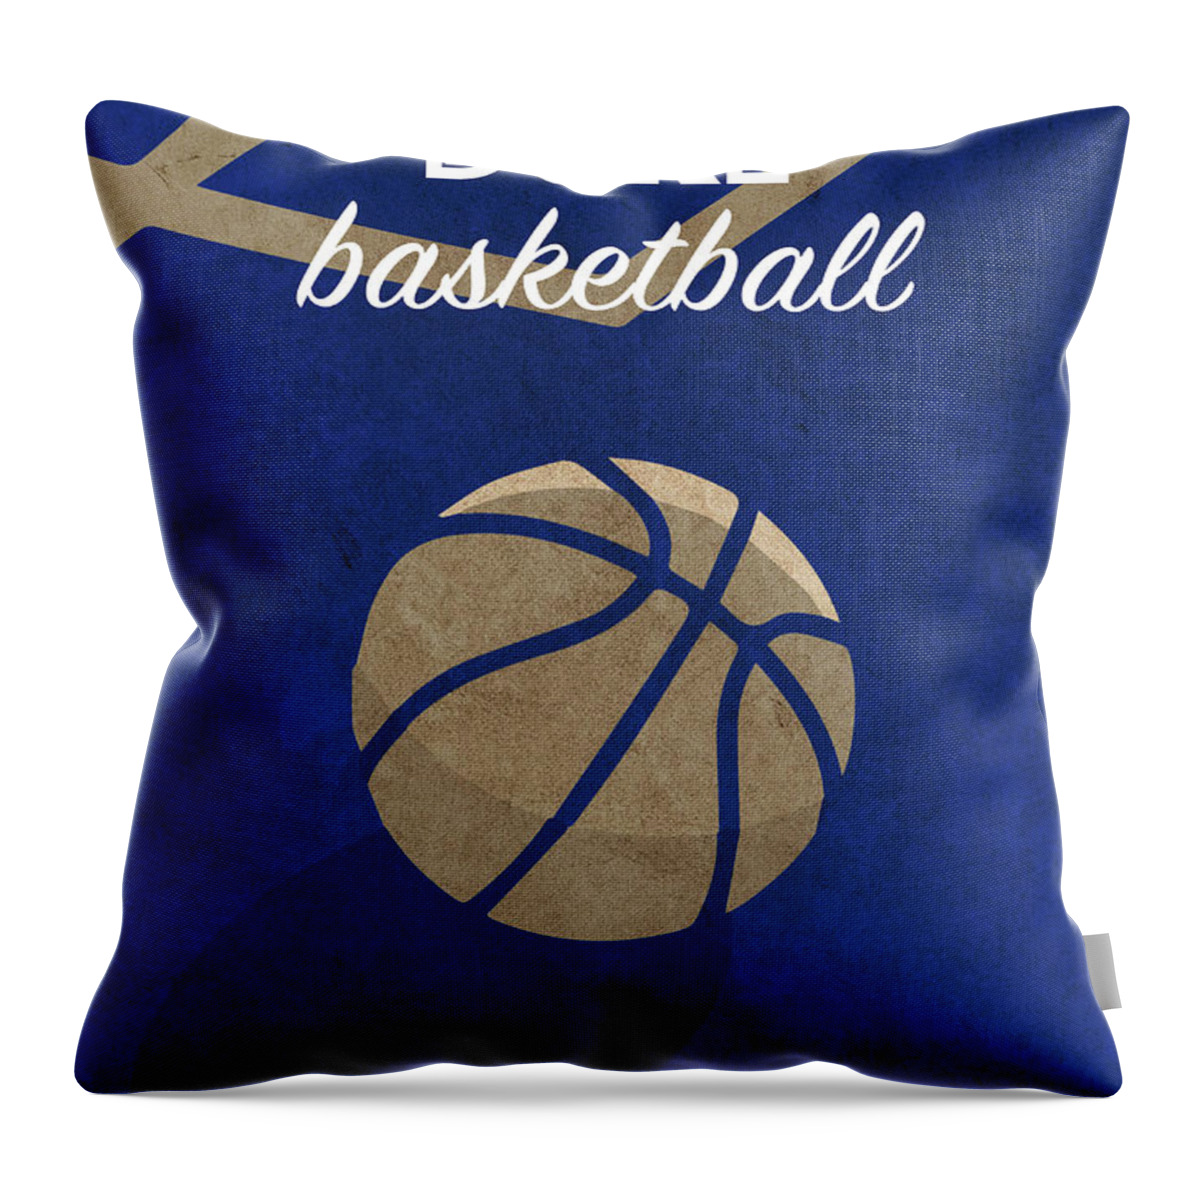 Duke Throw Pillow featuring the mixed media Duke University Retro College Basketball Team Poster by Design Turnpike